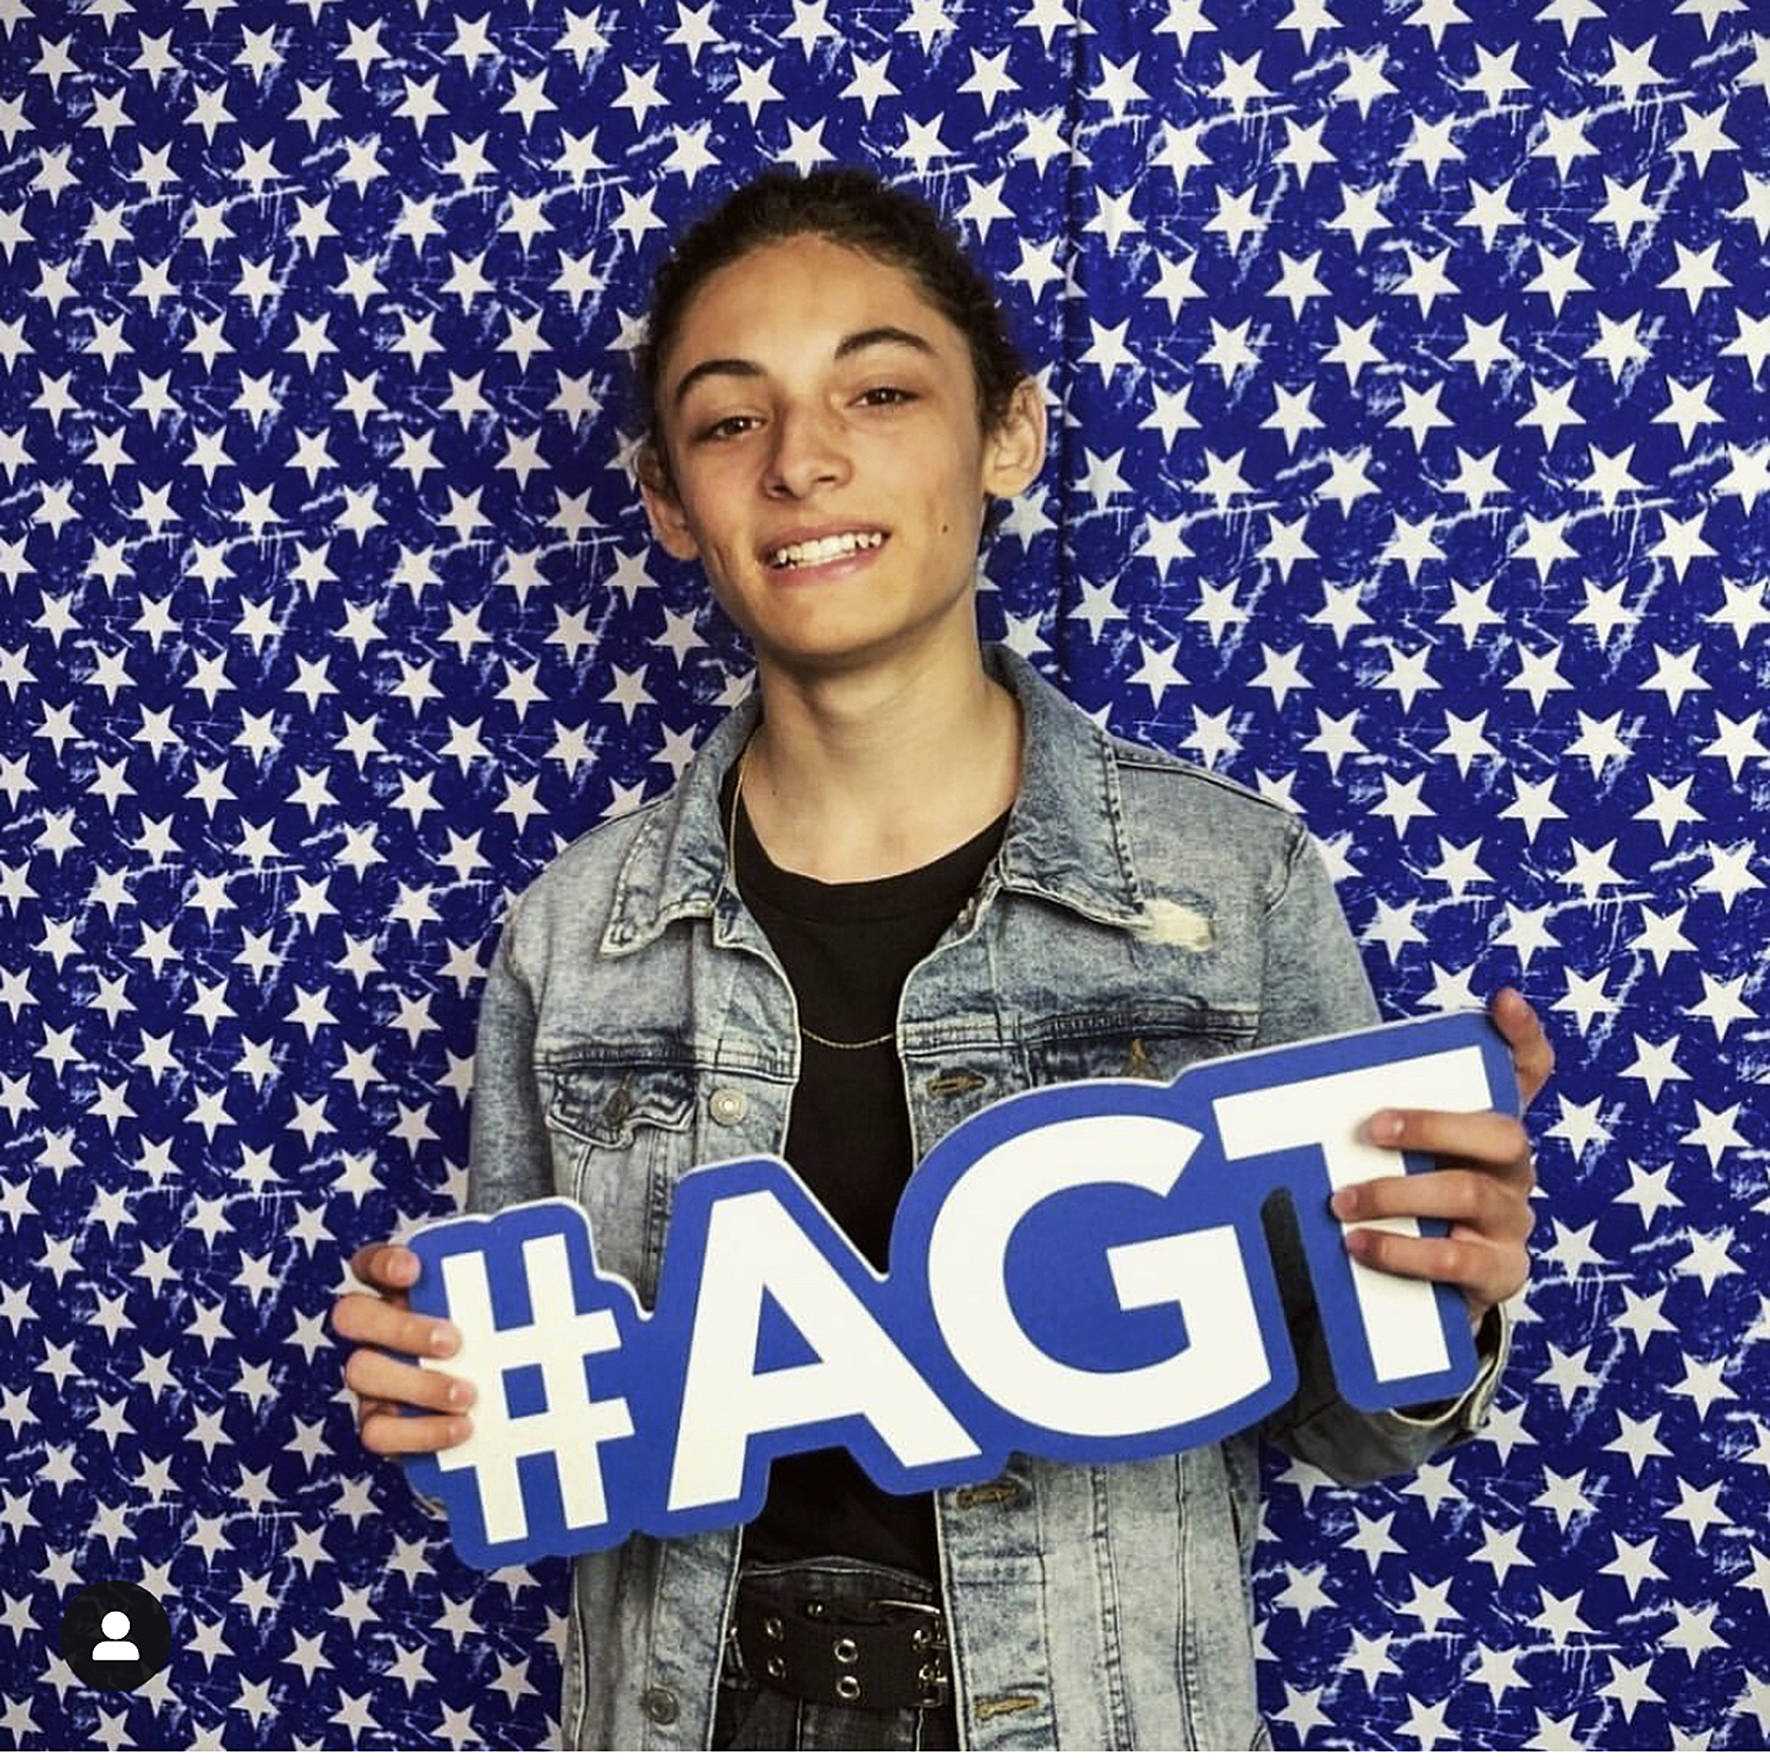 Photo pulled from                                 Bryant’s Instagram                                 Benicio Bryant from Maple Valley holding up an America’s Got Talent hashtag. Bryant’s performance on the show aired June 4.